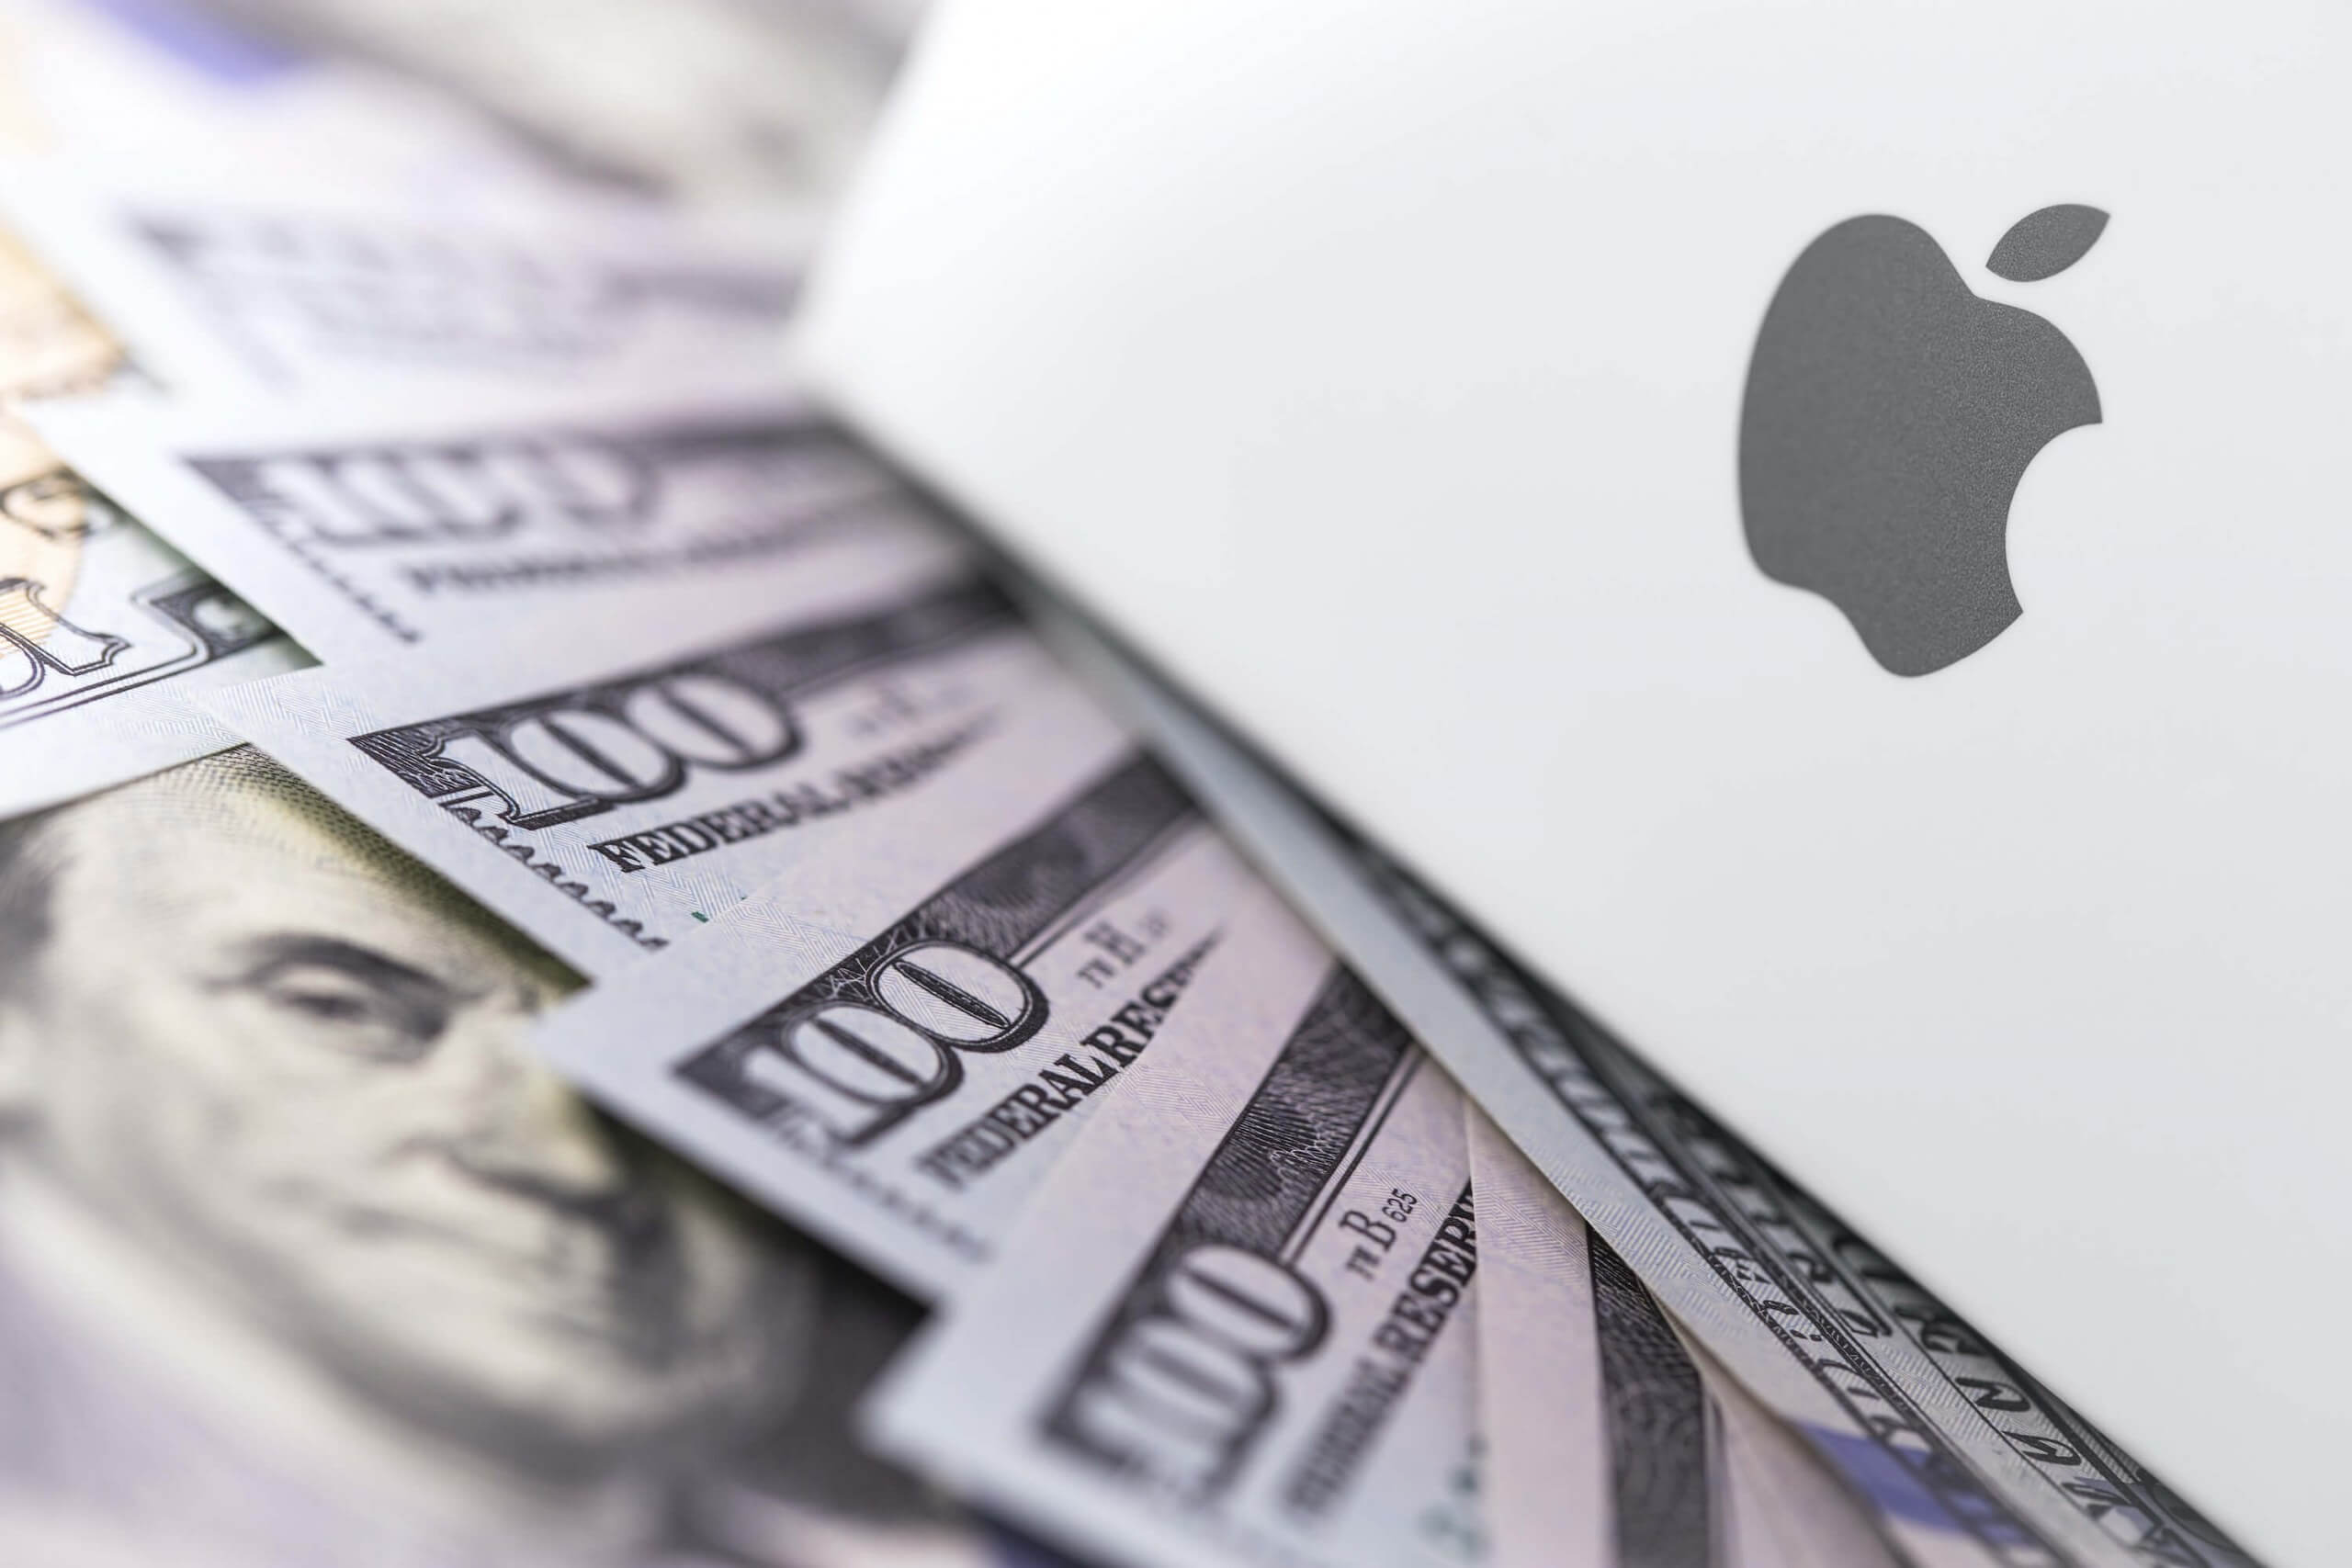 Apple is now world's most valuable company with $2 trillion market capitalization